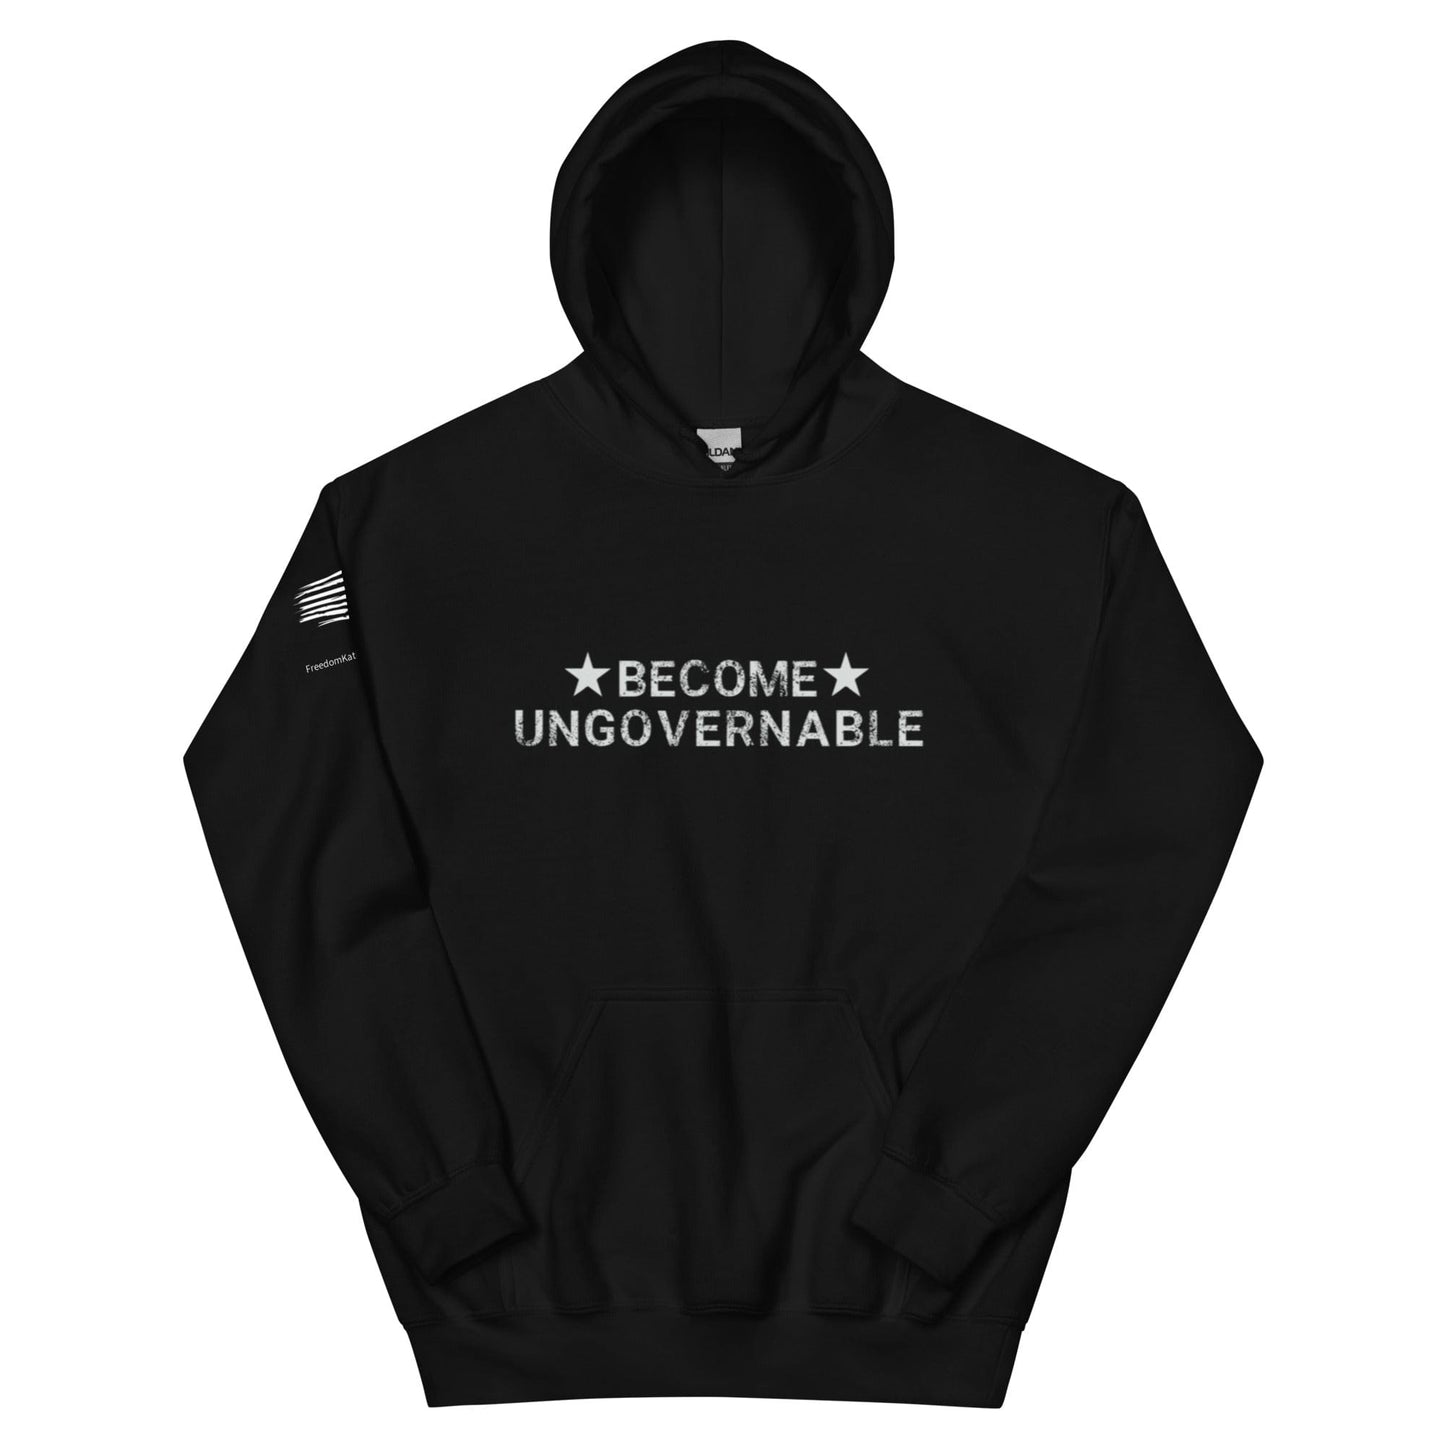 FreedomKat Designs Hoodie Black / S Become Ungovernable Hoodie